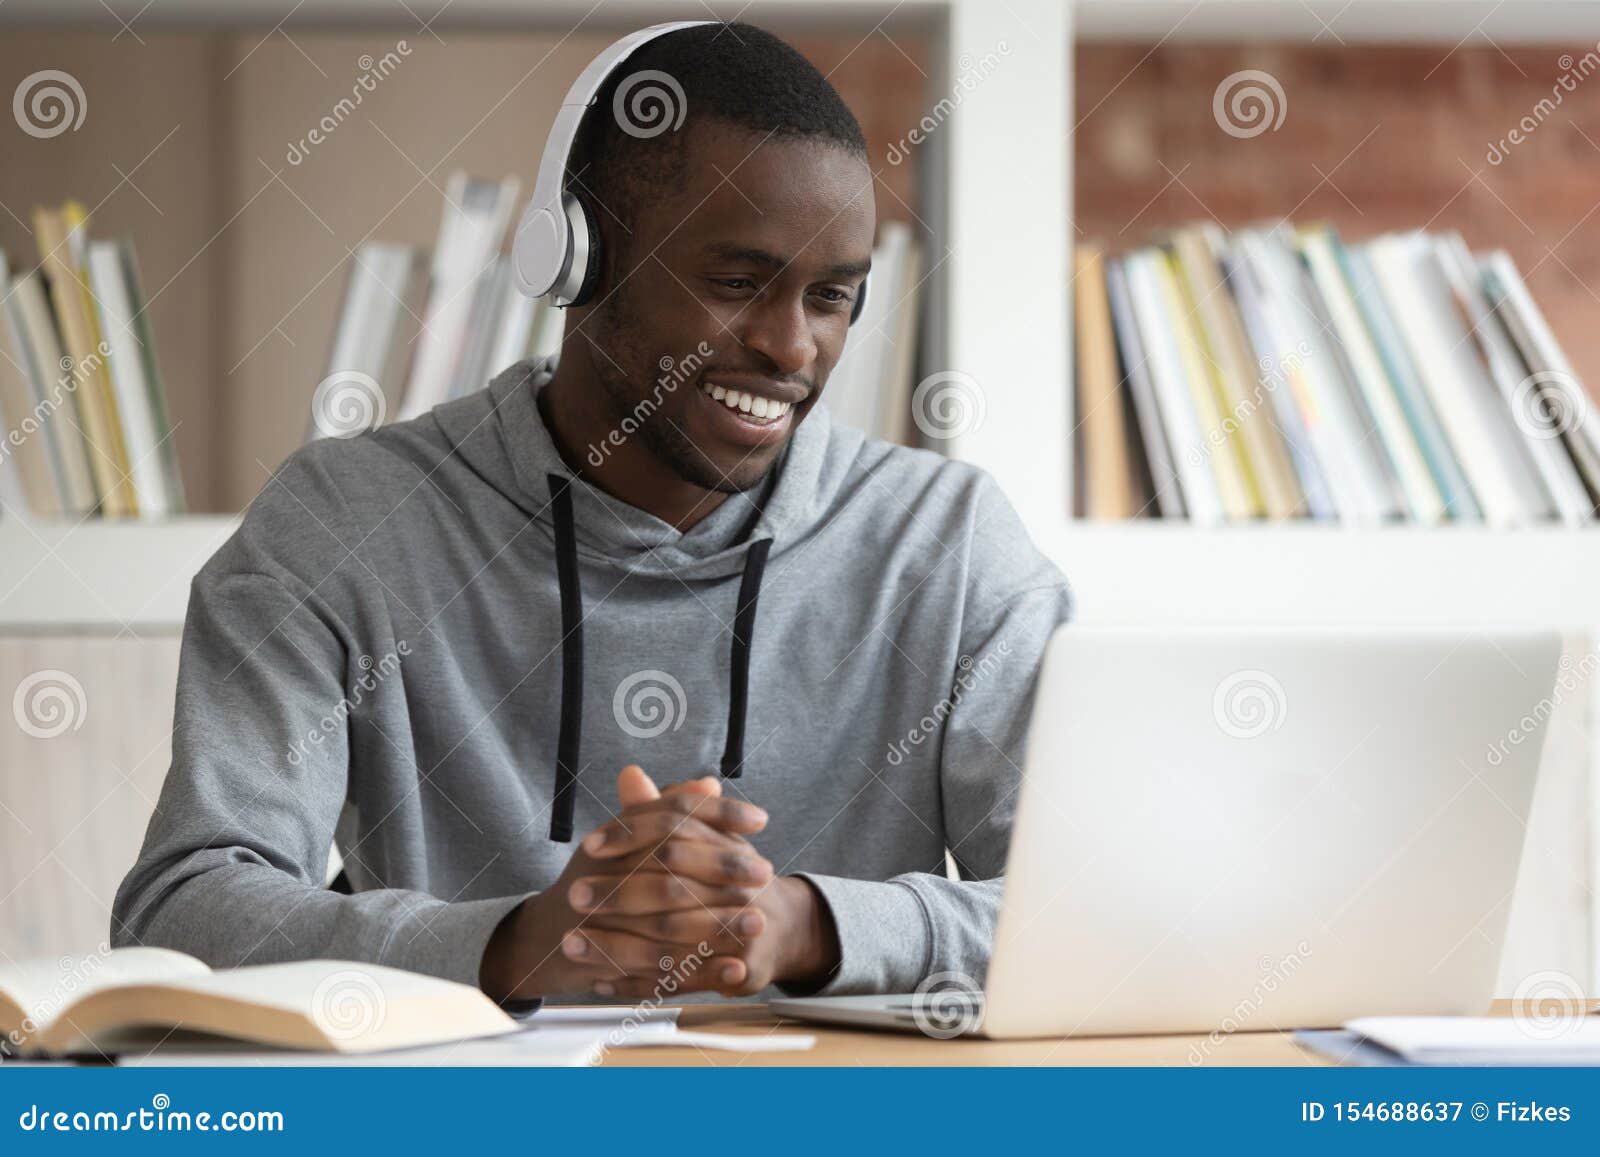 smiling black male watch online training course at laptop